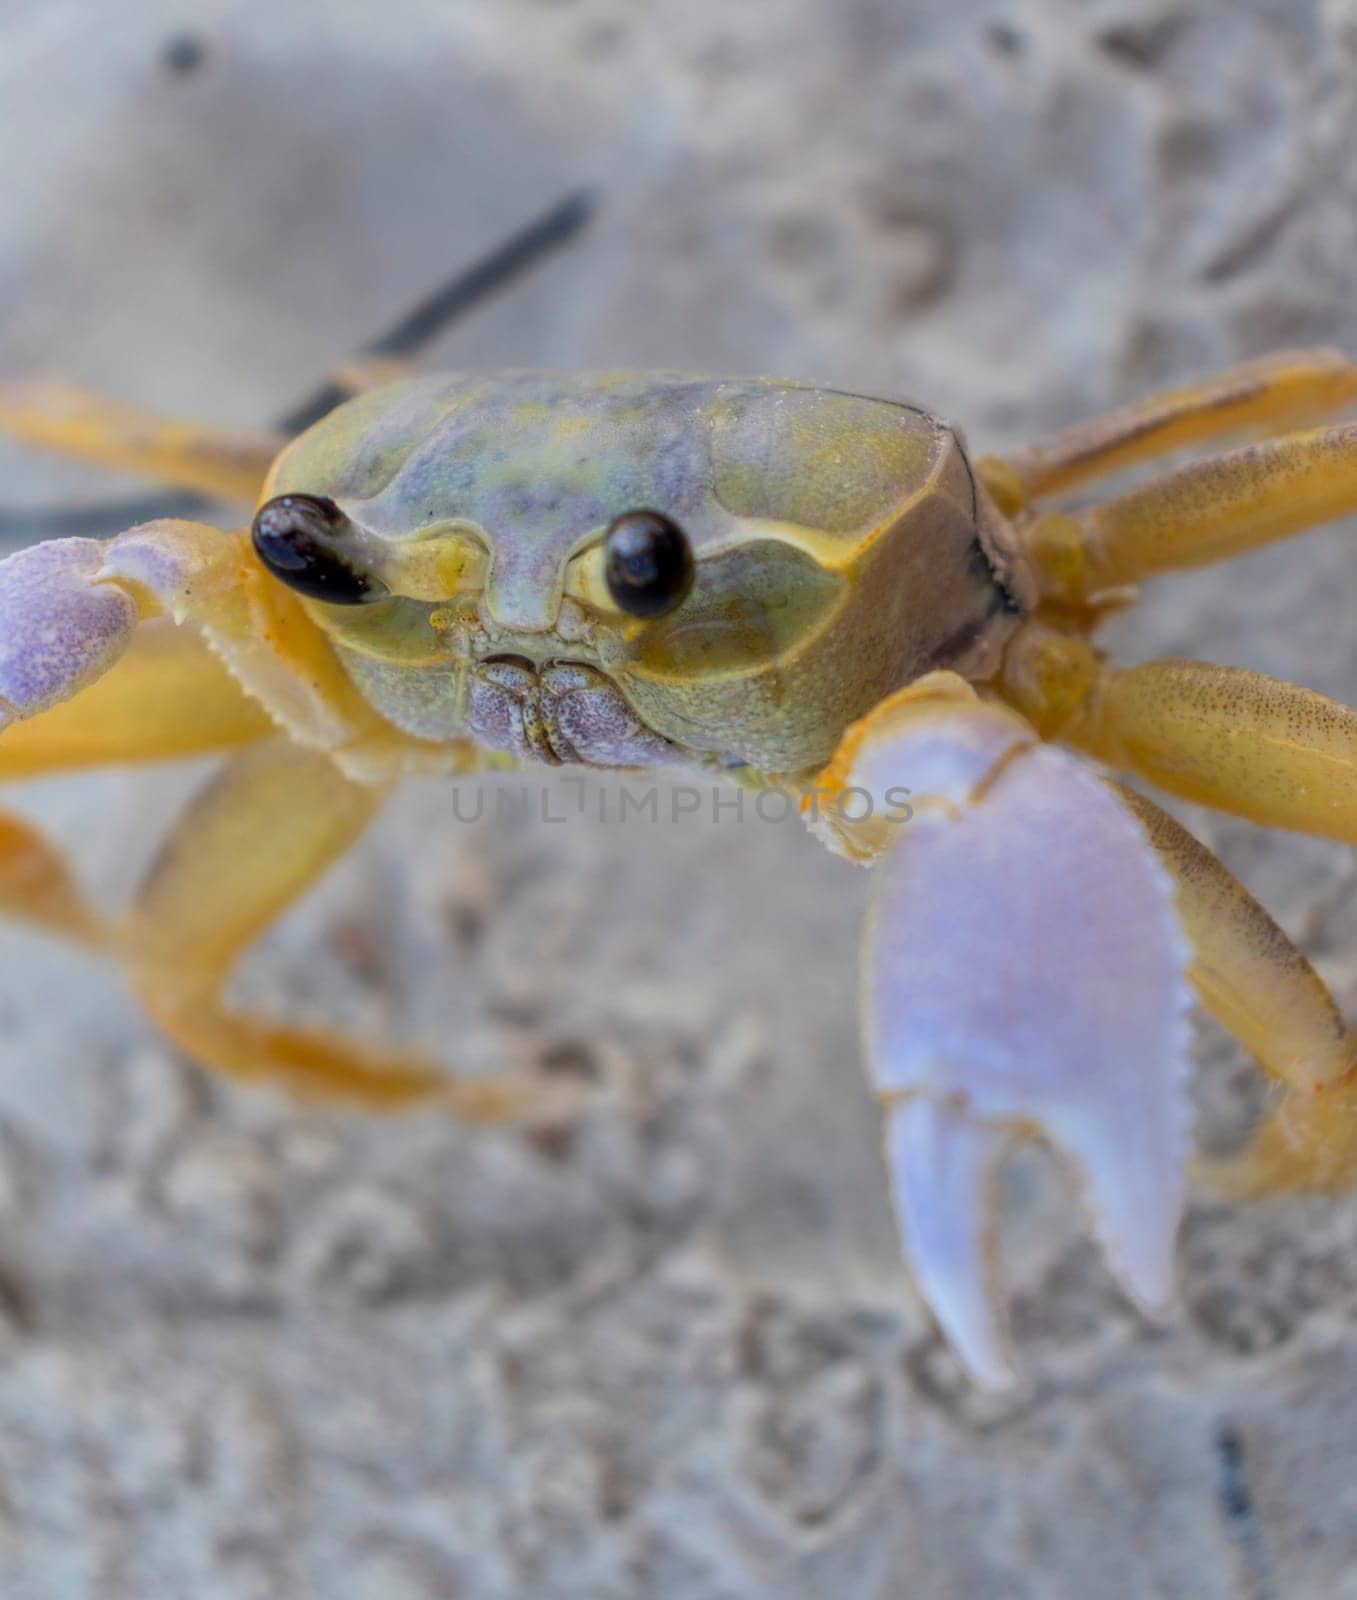 Close up shot of the small crab on the sand